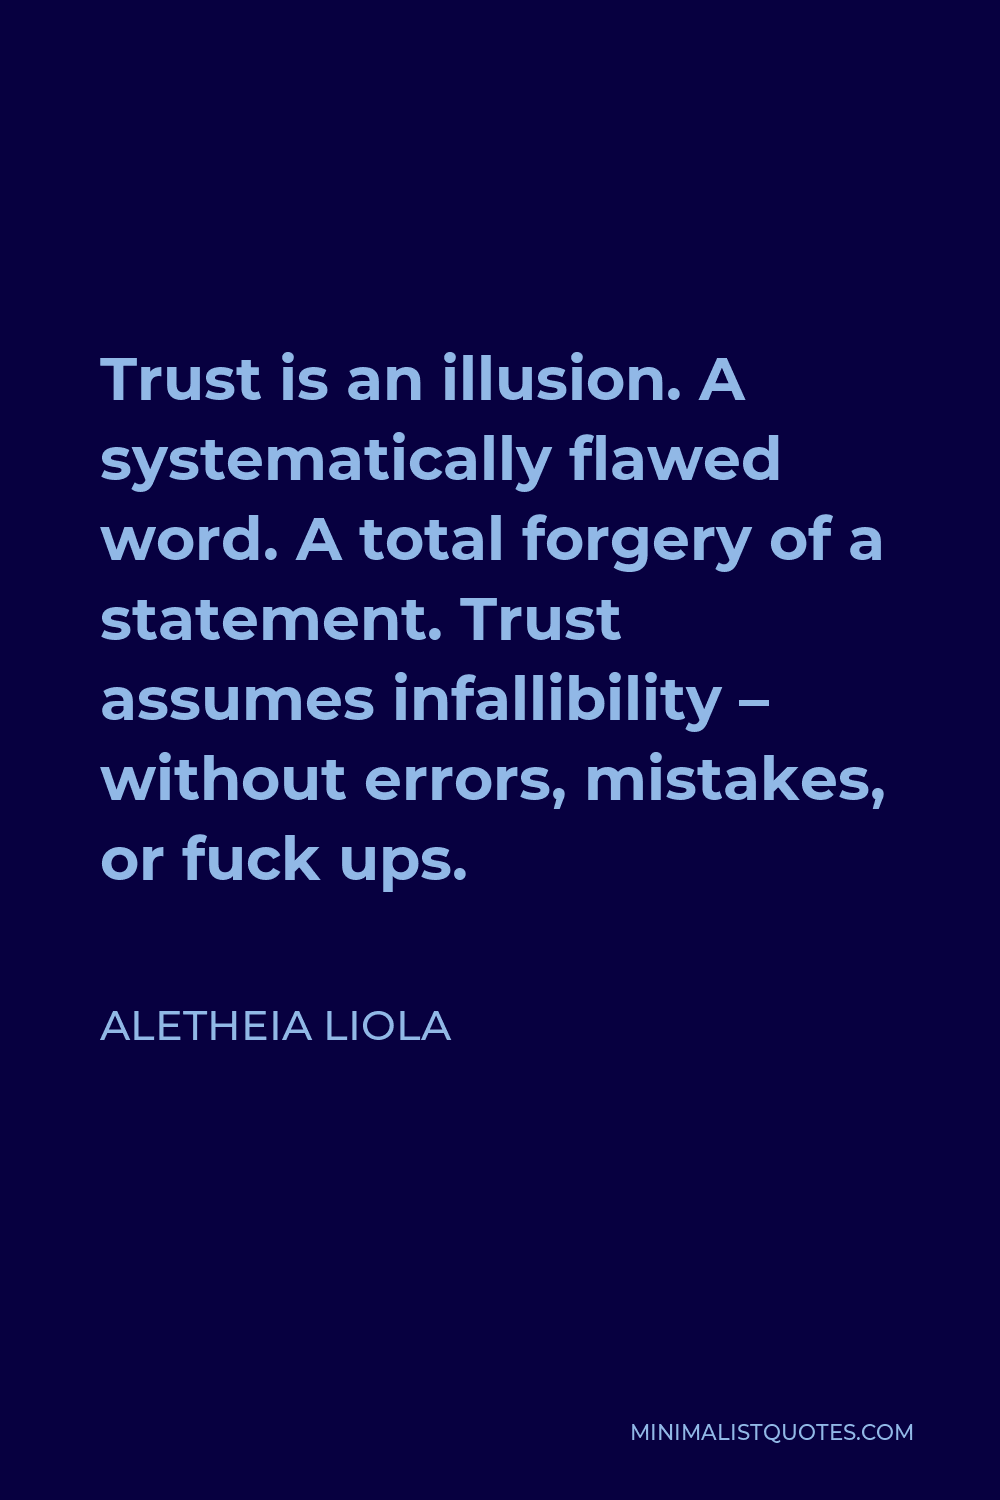 Aletheia Liola Quote - Trust is an illusion. A systematically flawed word. A total forgery of a statement. Trust assumes infallibility – without errors, mistakes, or fuck ups.